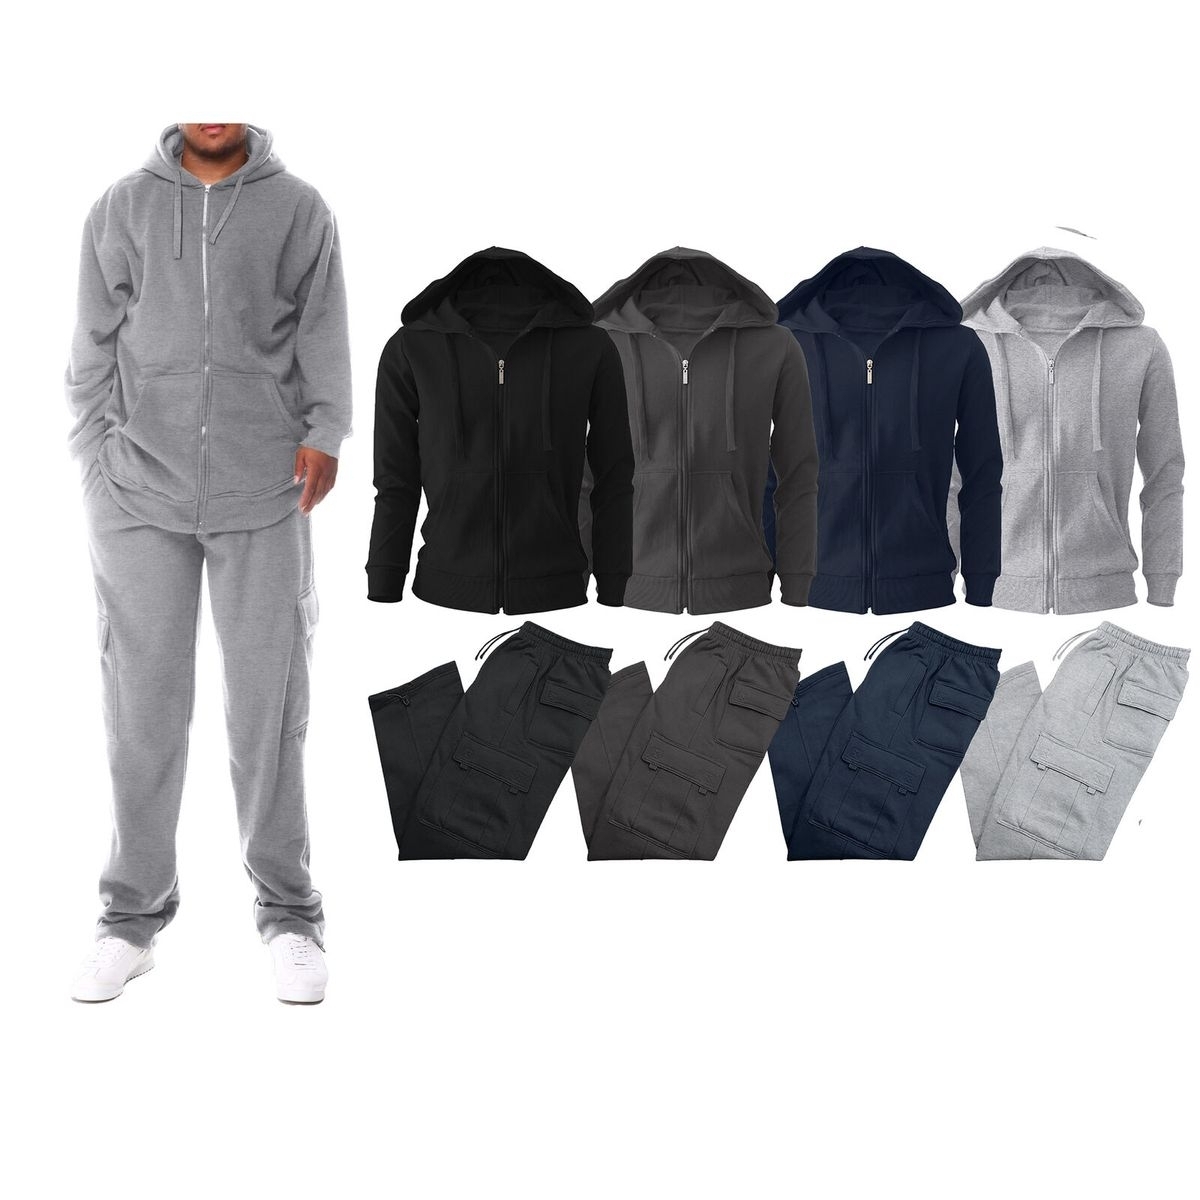 Multi-Pack: Men's Big & Tall Winter Warm Athletic Active Cozy Fleece Lined Multi-Pocket Full Zip Up Cargo Tracksuit - Charcoal, 2-pack, 3xl